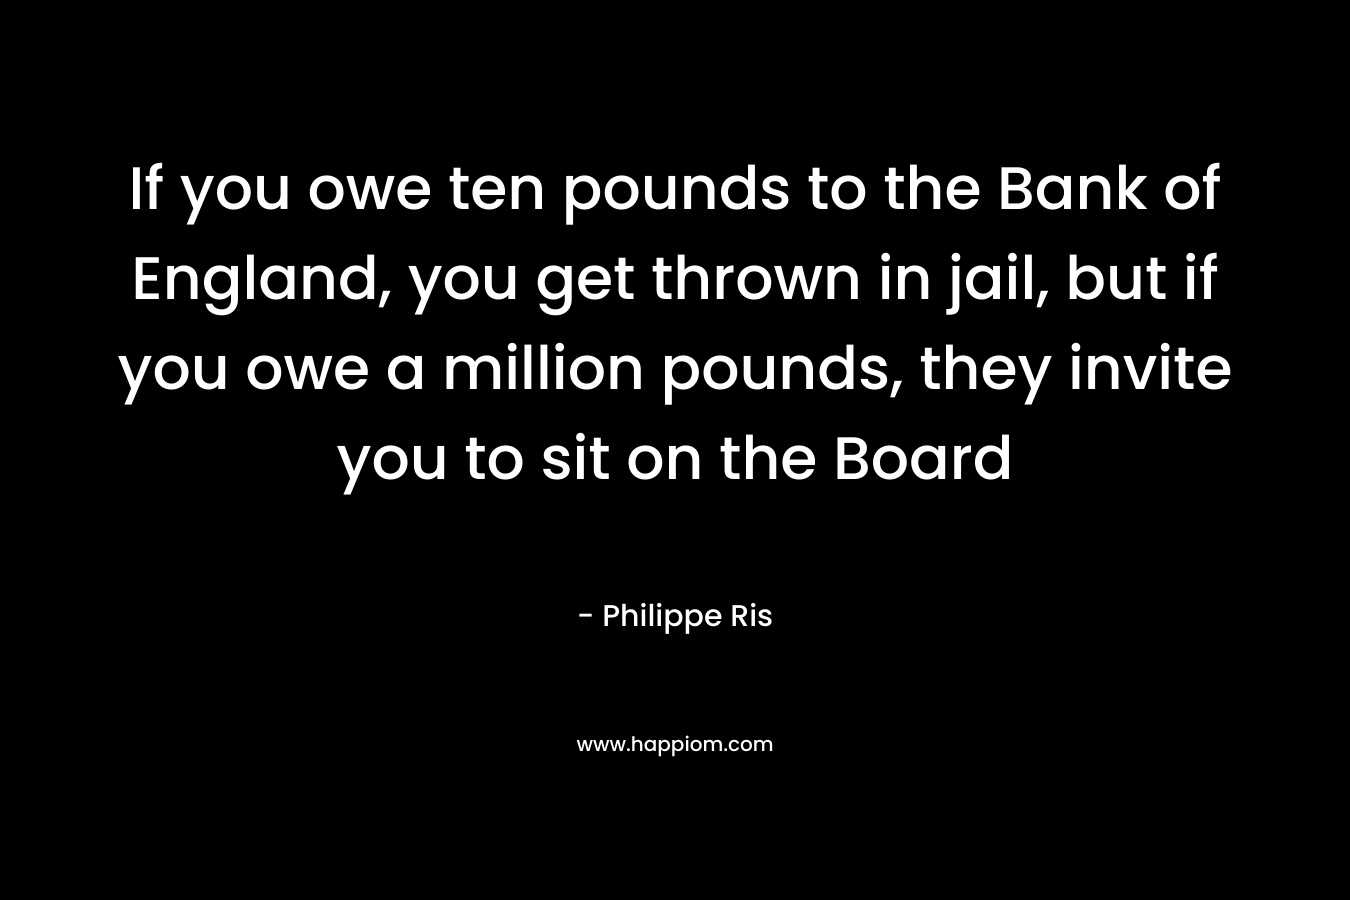 If you owe ten pounds to the Bank of England, you get thrown in jail, but if you owe a million pounds, they invite you to sit on the Board – Philippe Ris